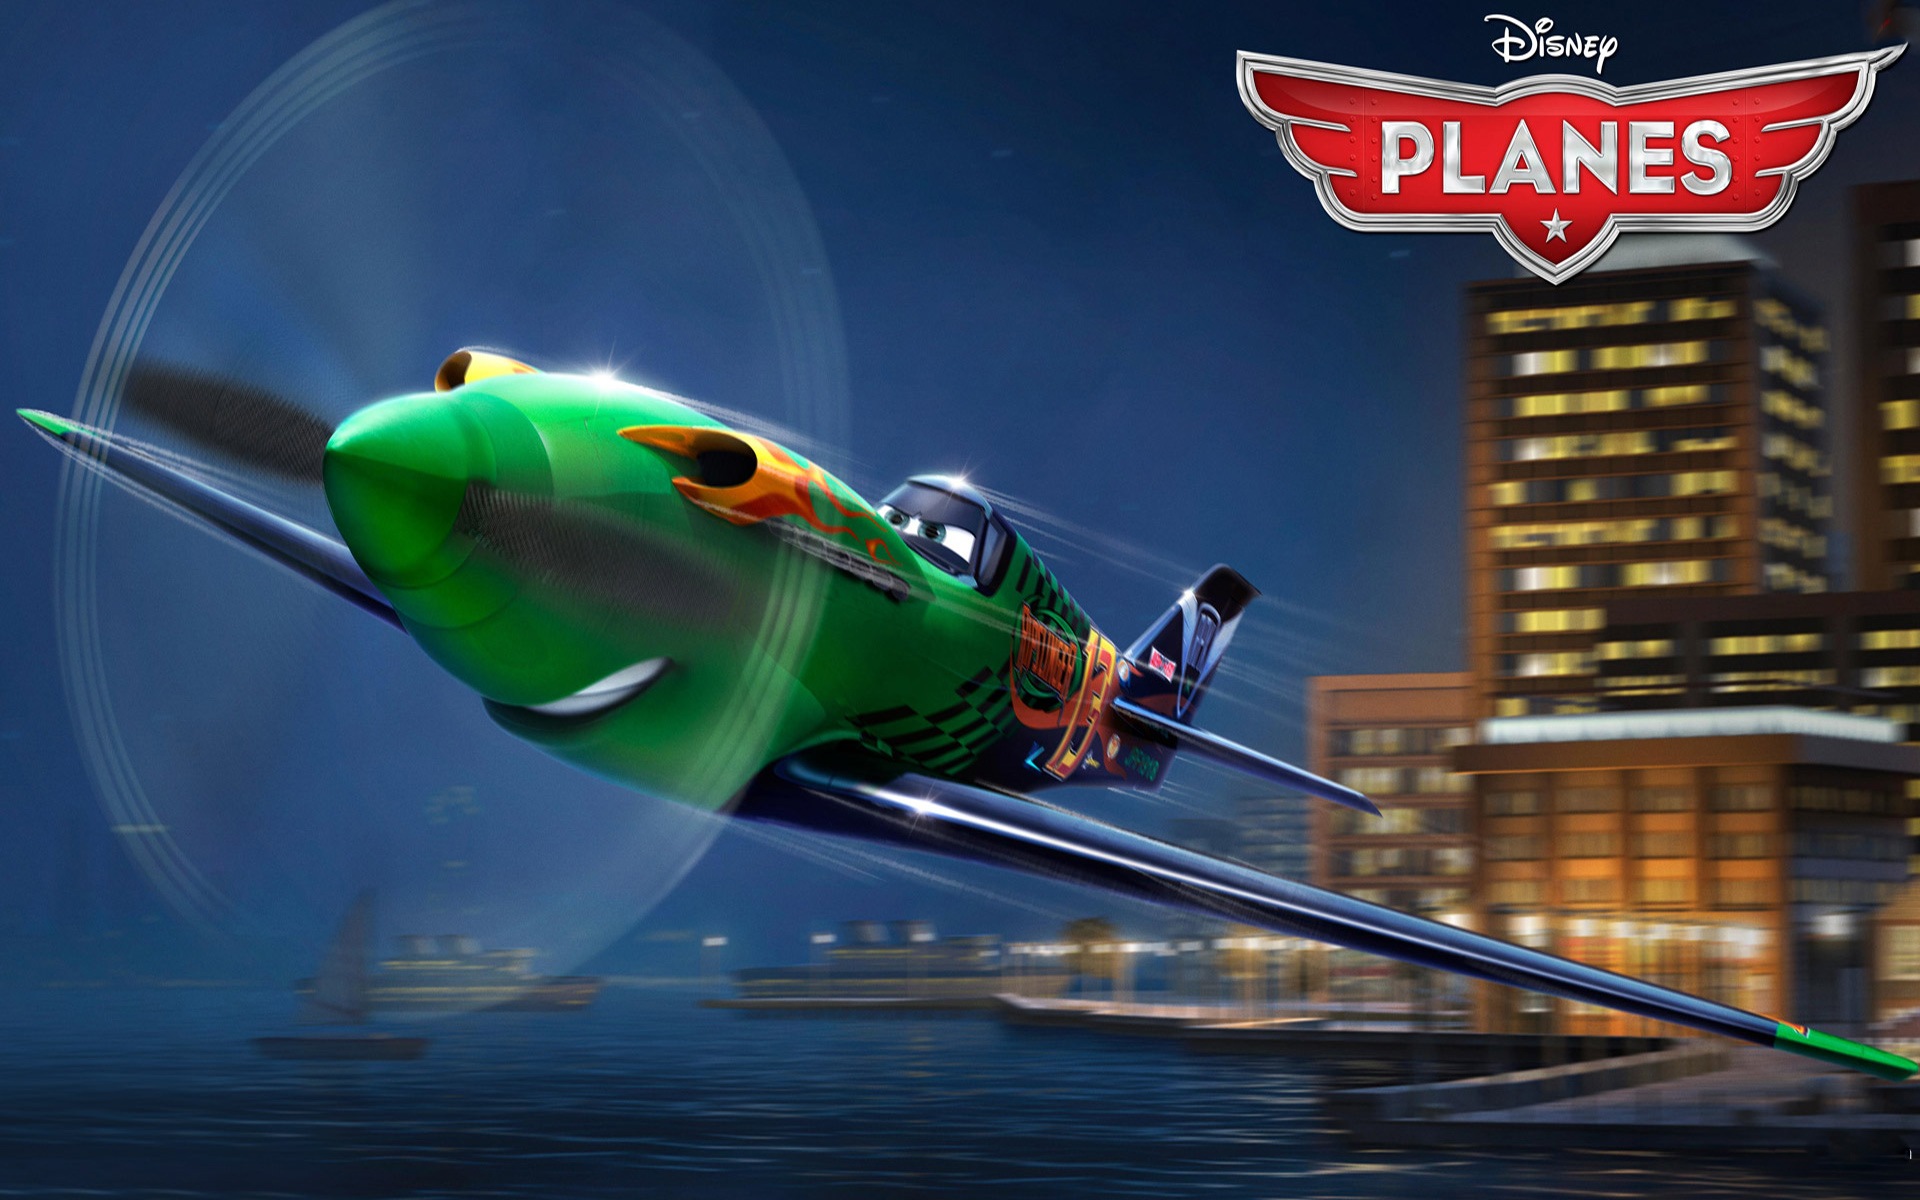 Planes 2013 HD wallpapers #14 - 1920x1200